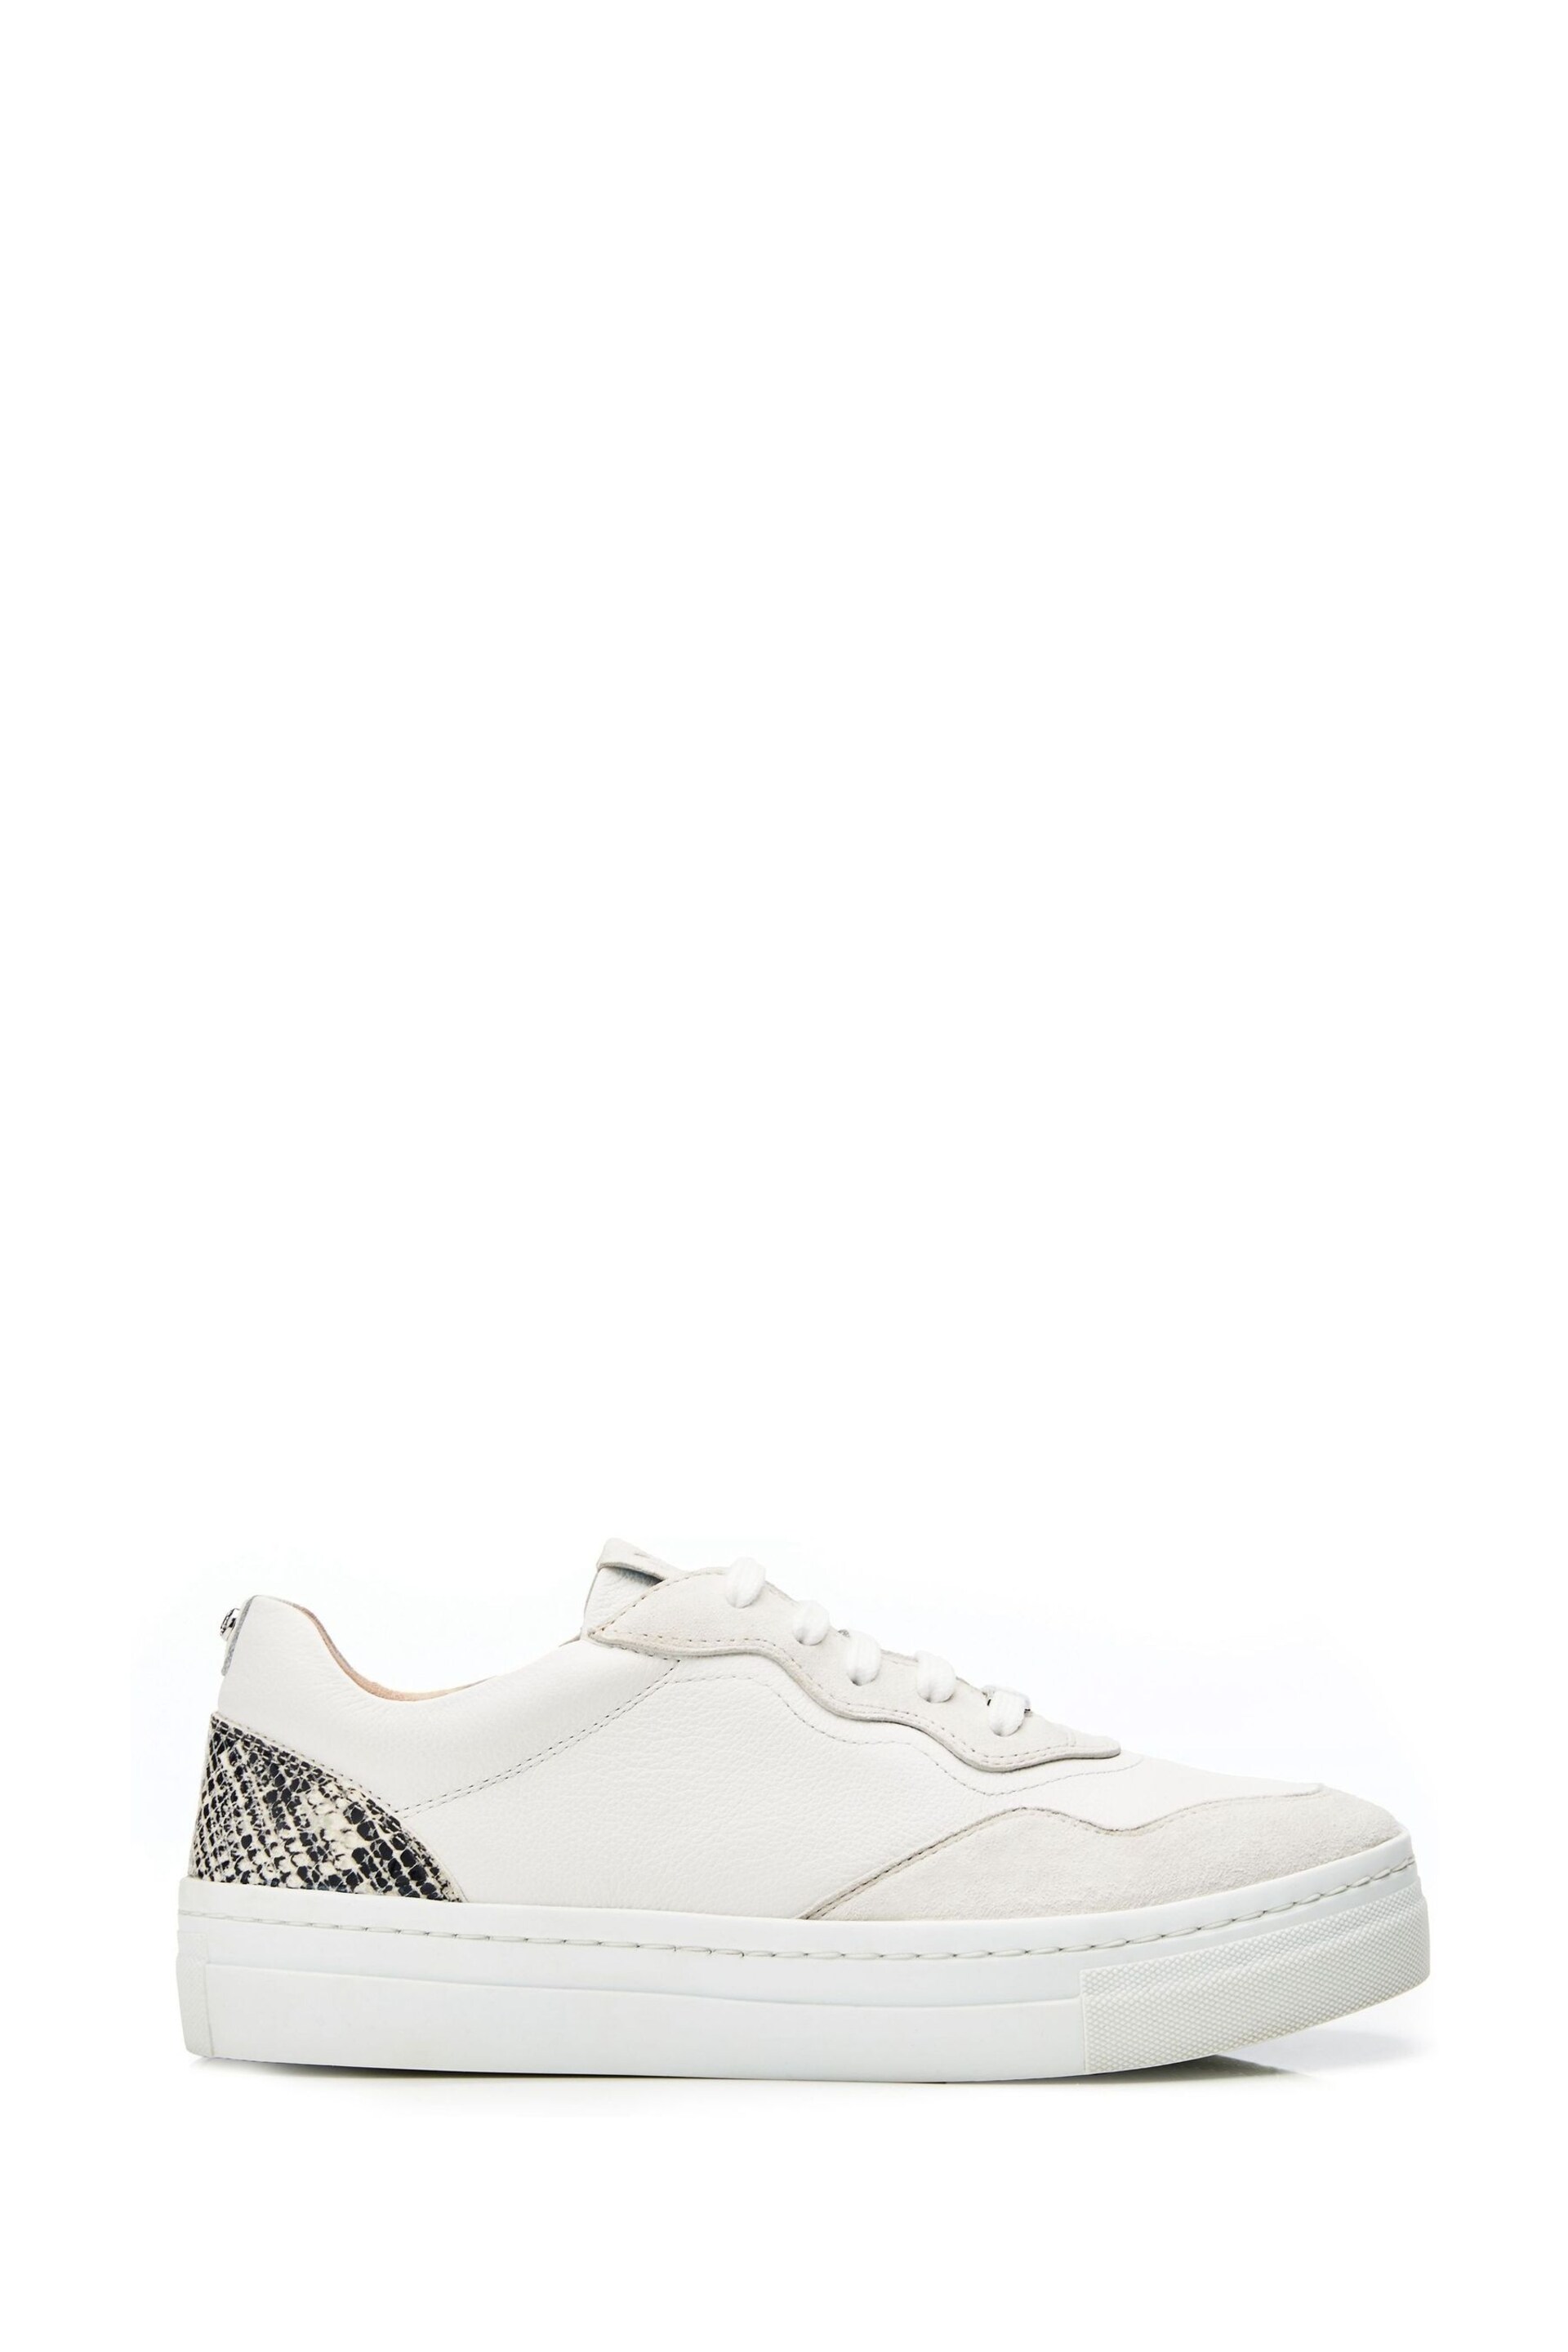 Moda in Pelle Adalaya Scallop Chunky White Trainers - Image 1 of 4